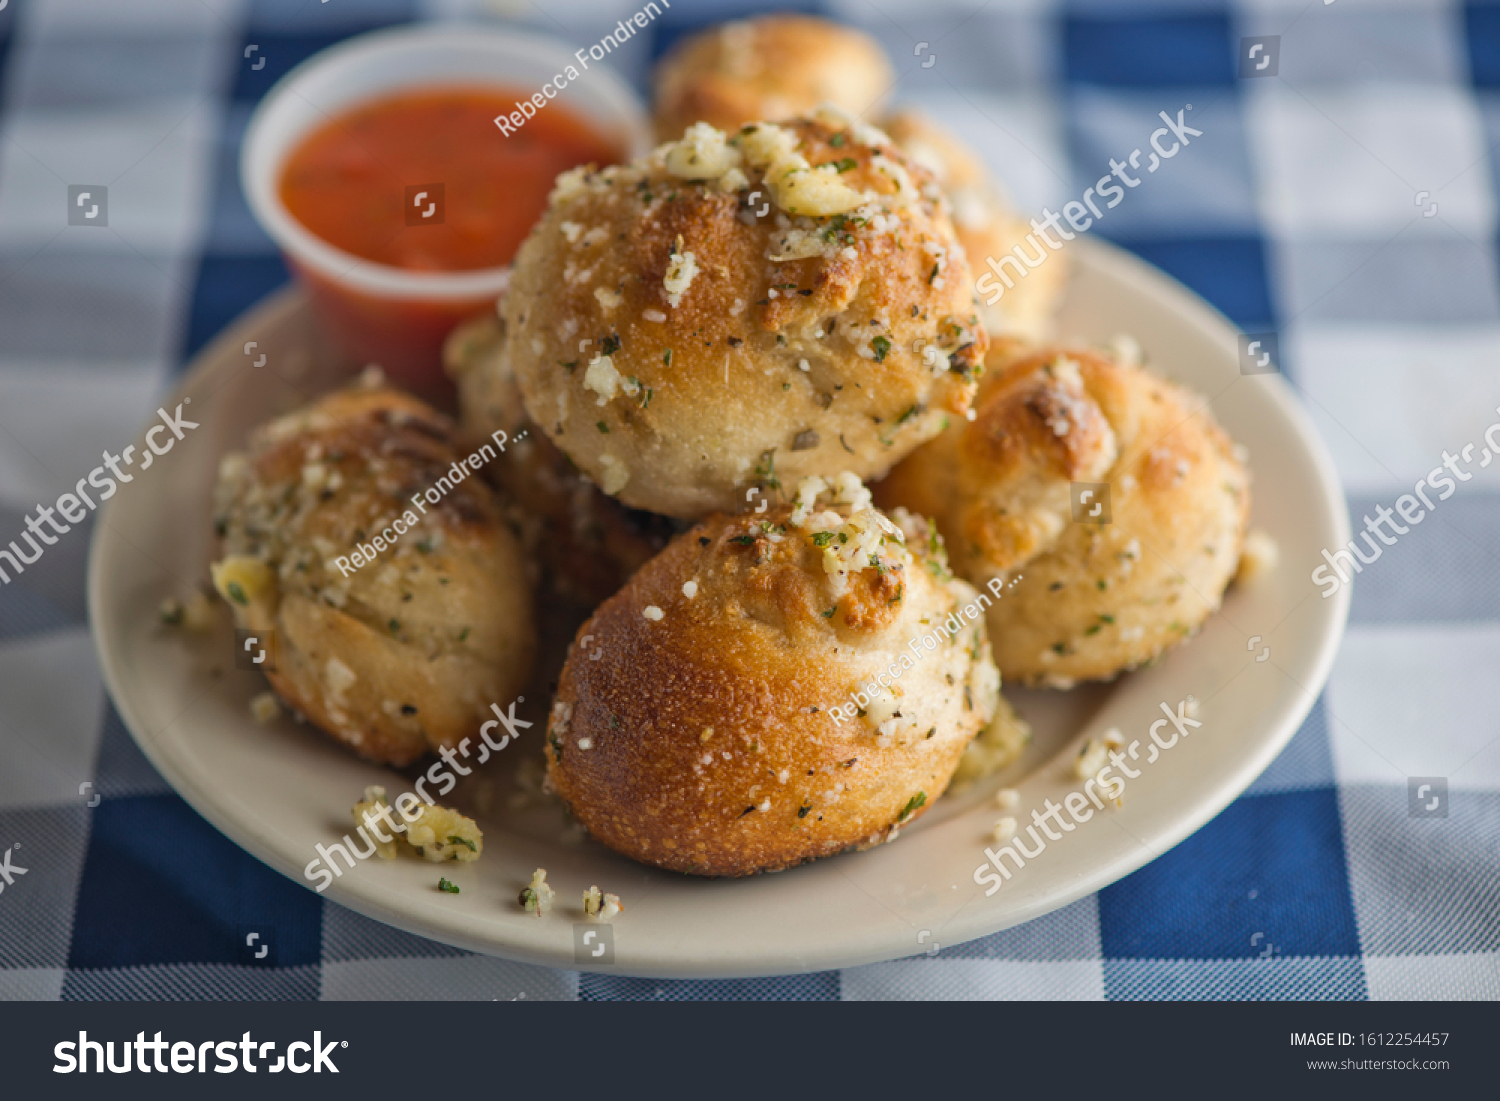 Garlic Herb and Cheese Rolls or Knots. Parmesan pull apart rolls, made with homemade pizza dough mixed with garlic and spices, rolled into knots baked and seasoned with garlic and olive oil.  #1612254457